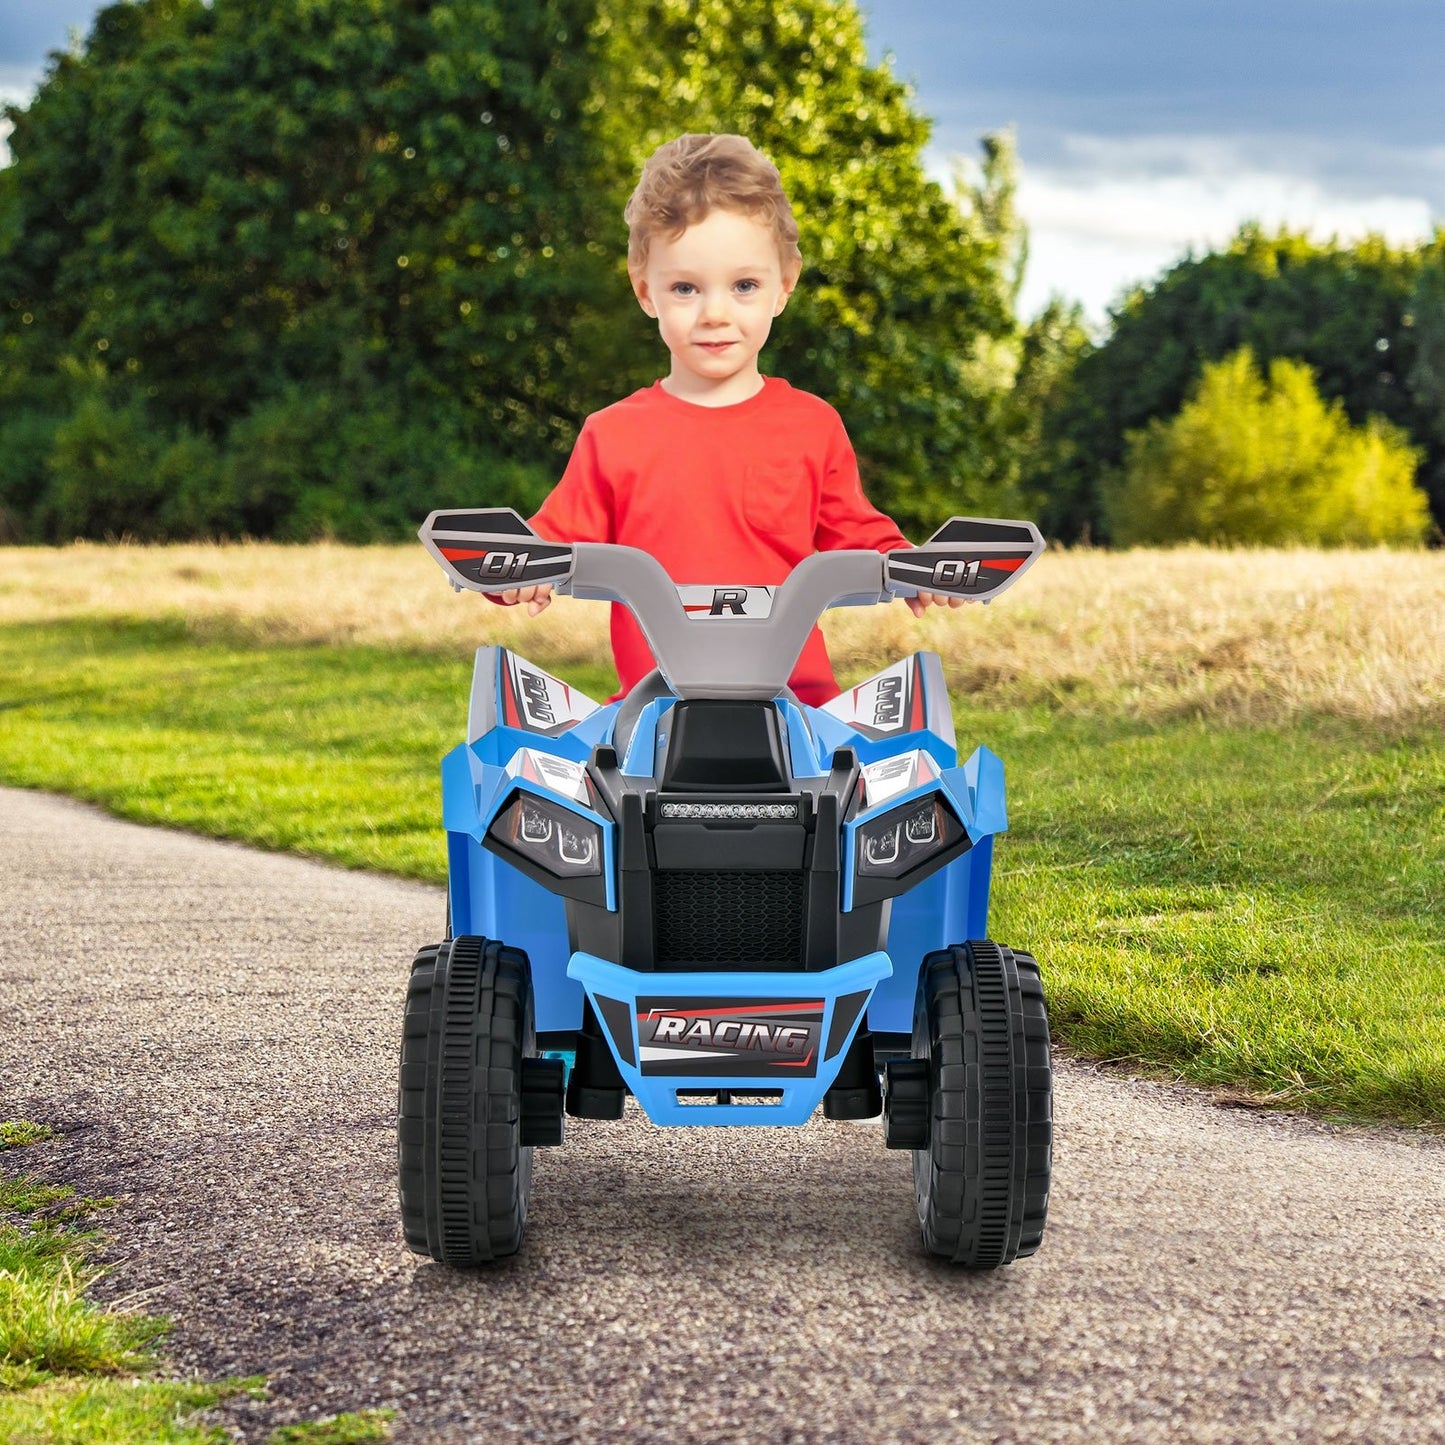 Kids Ride on ATV 4 Wheeler Quad Toy Car with Direction Control, Blue